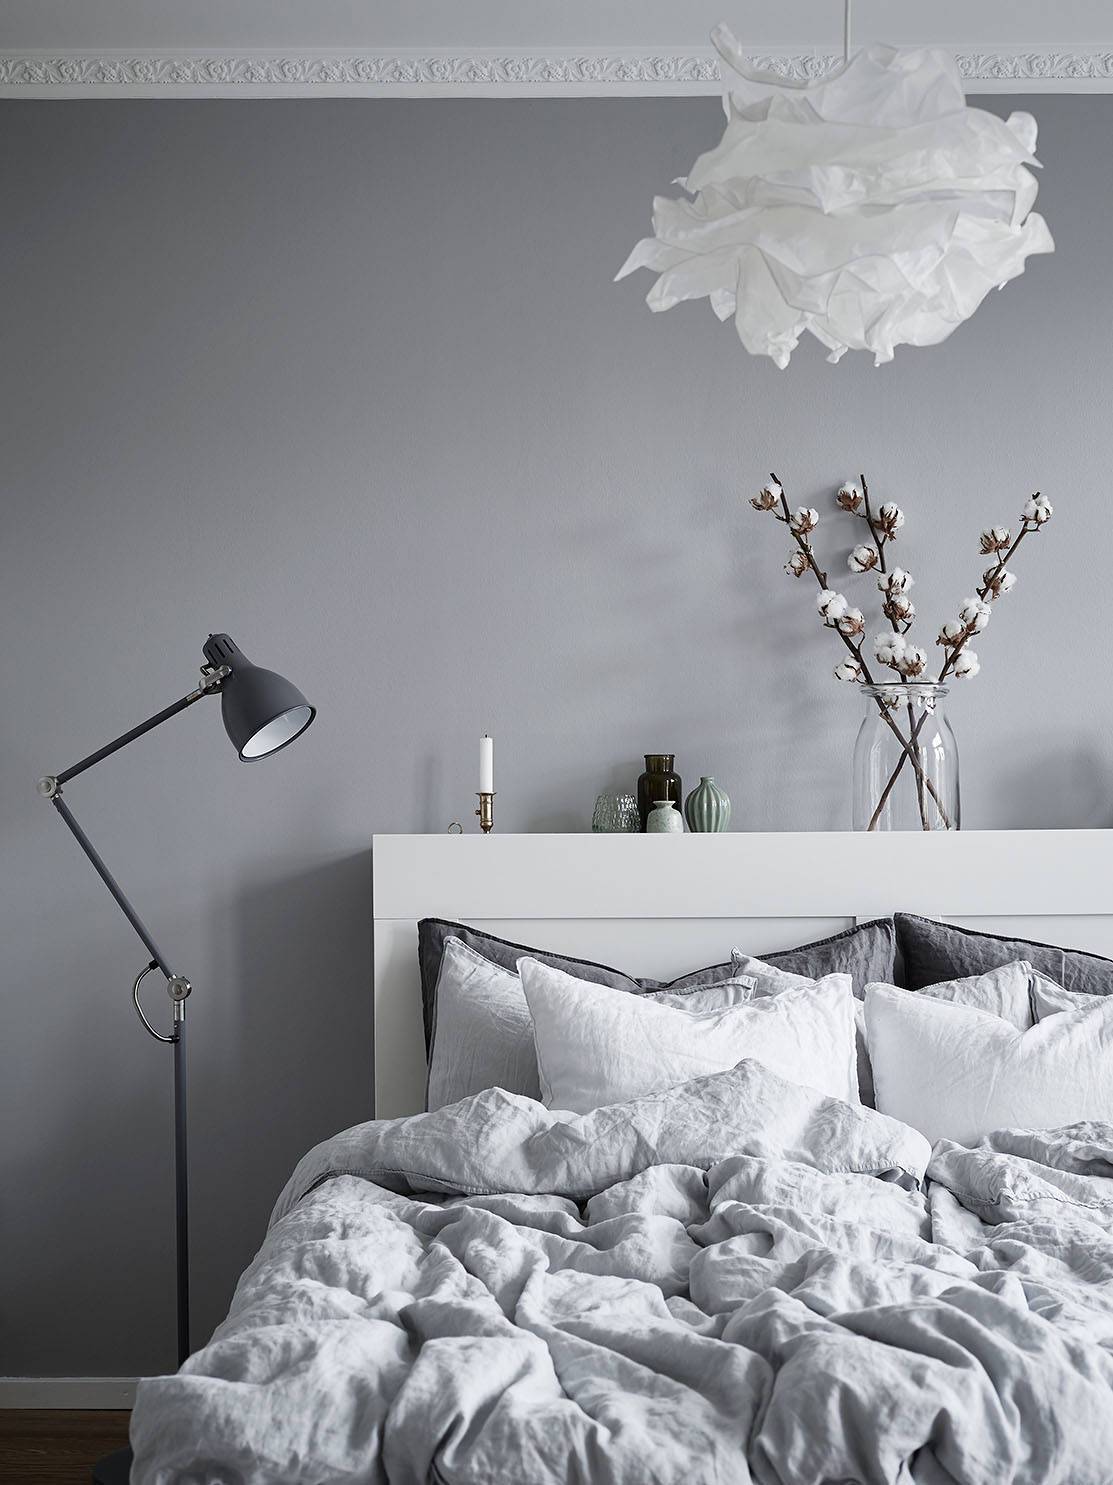 How to use modern floor lamps in your house this winter